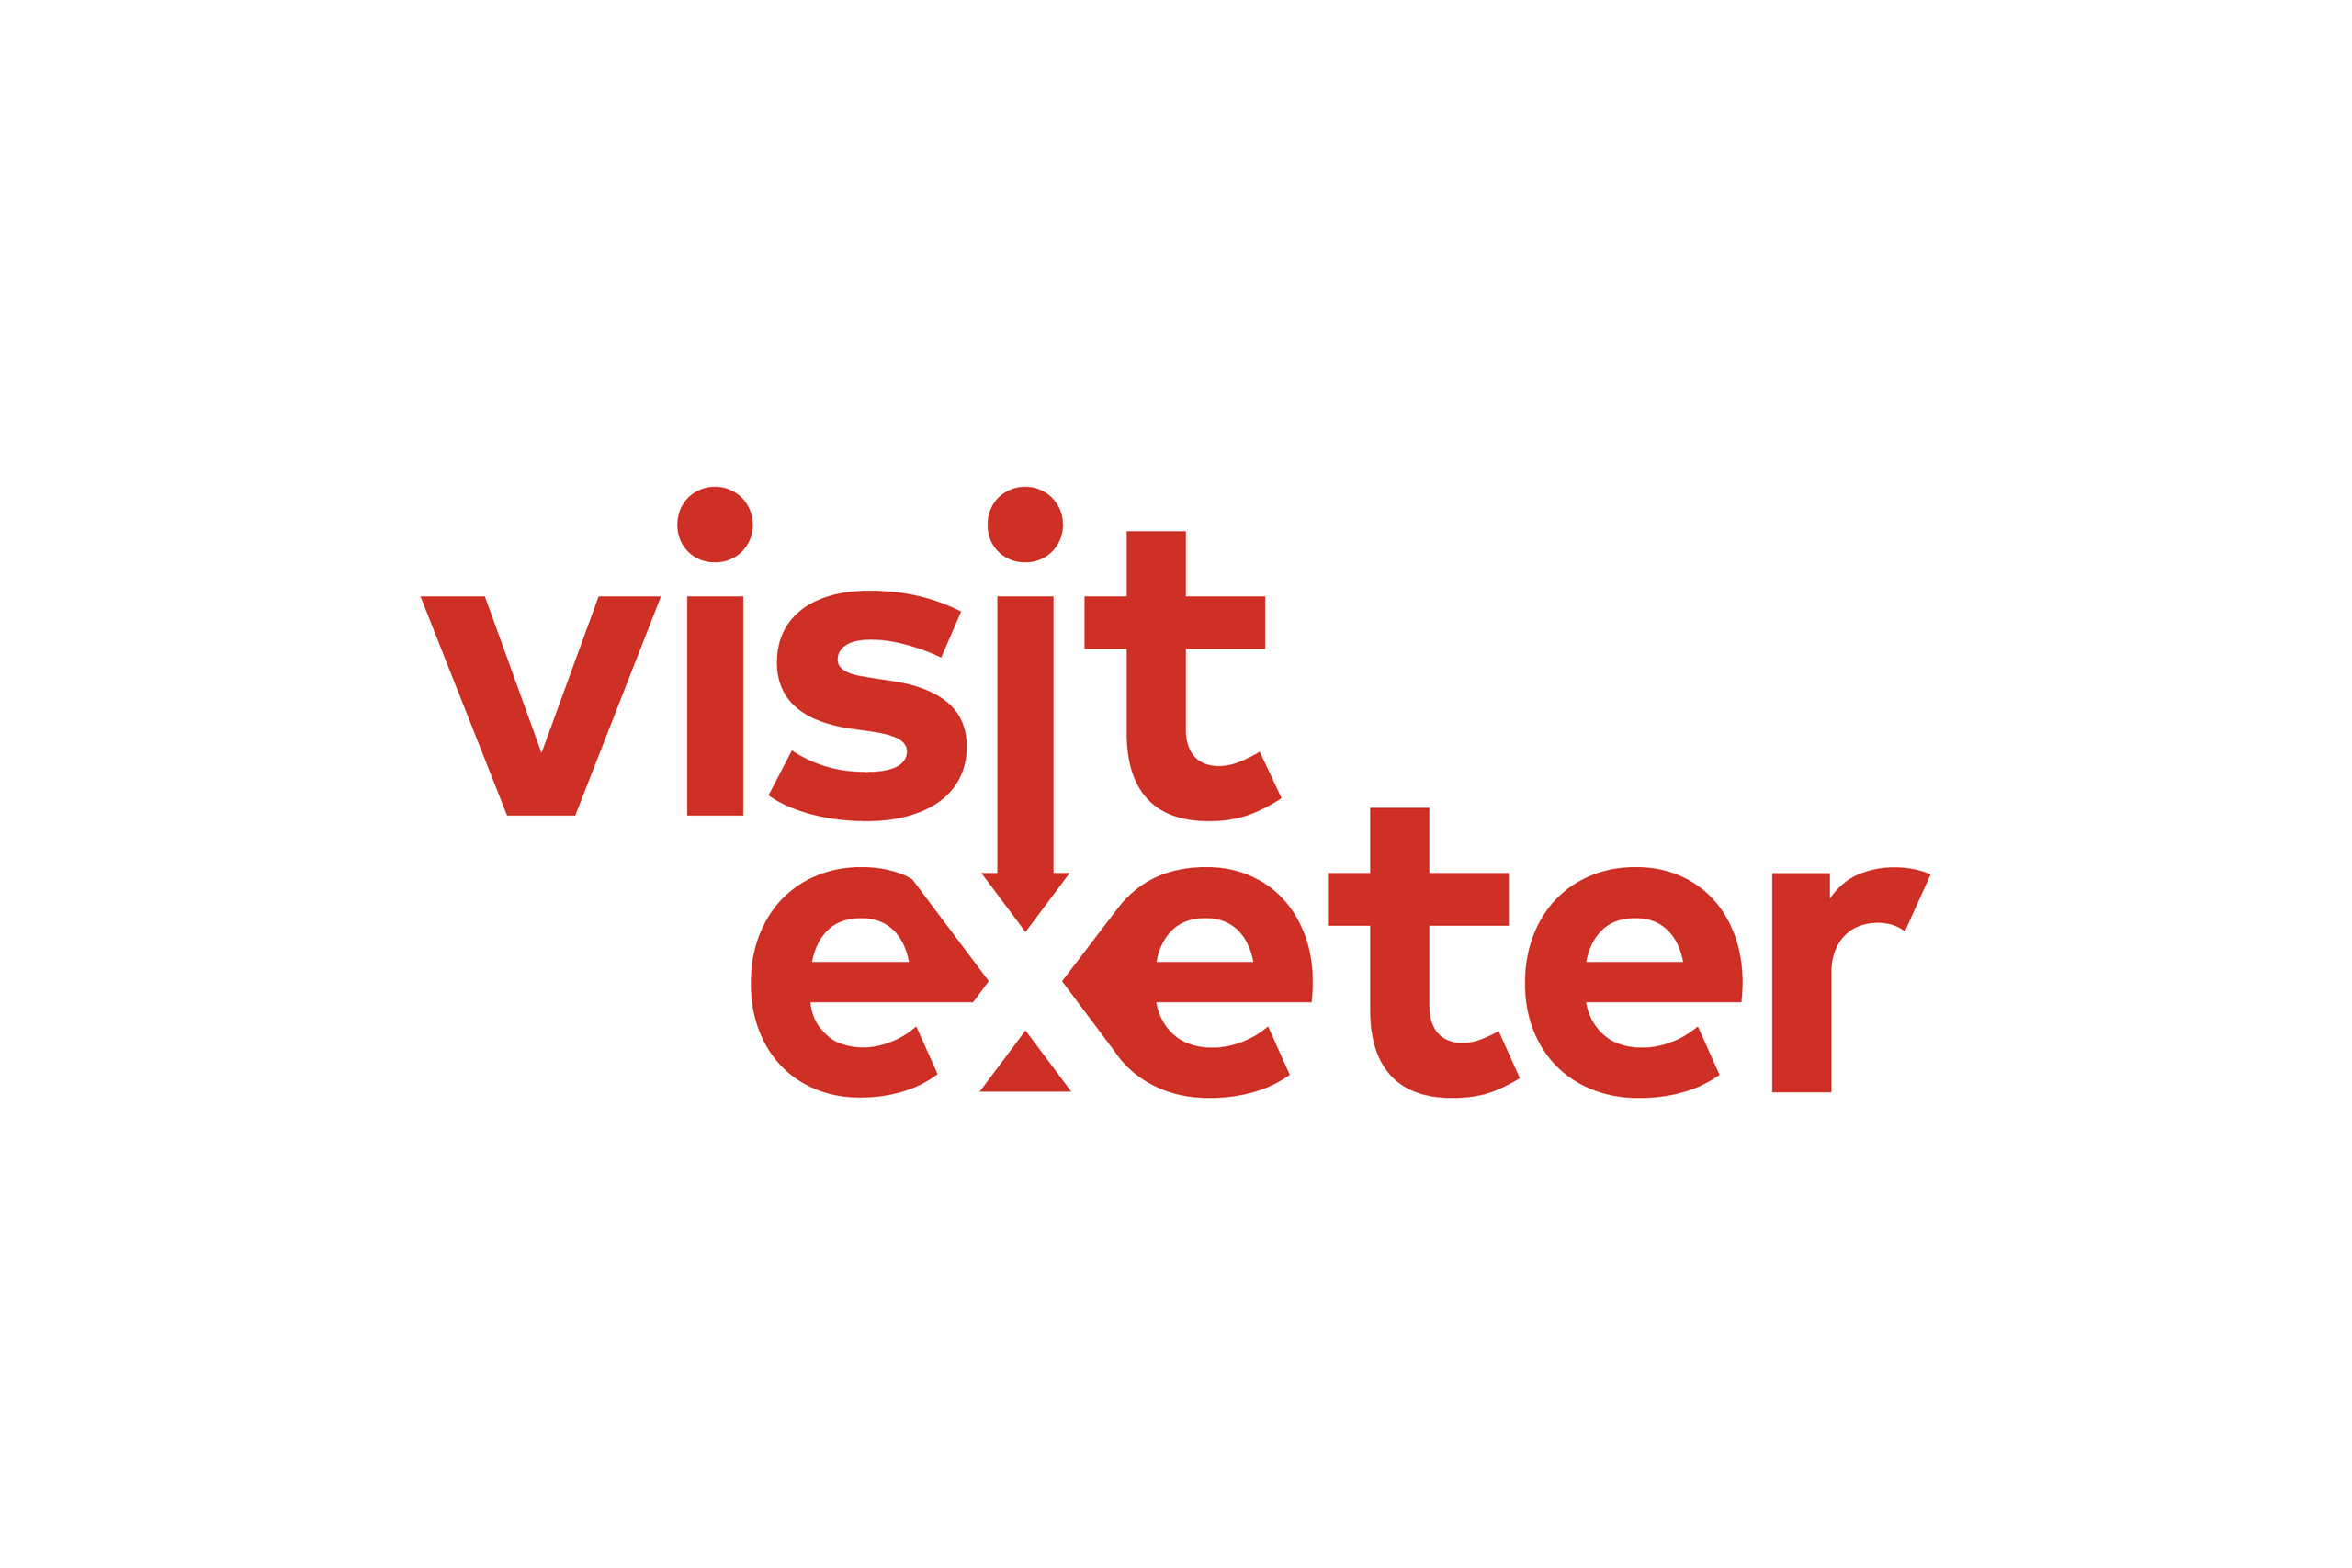 InExeter / Visit Exeter - Place branding and marketing support